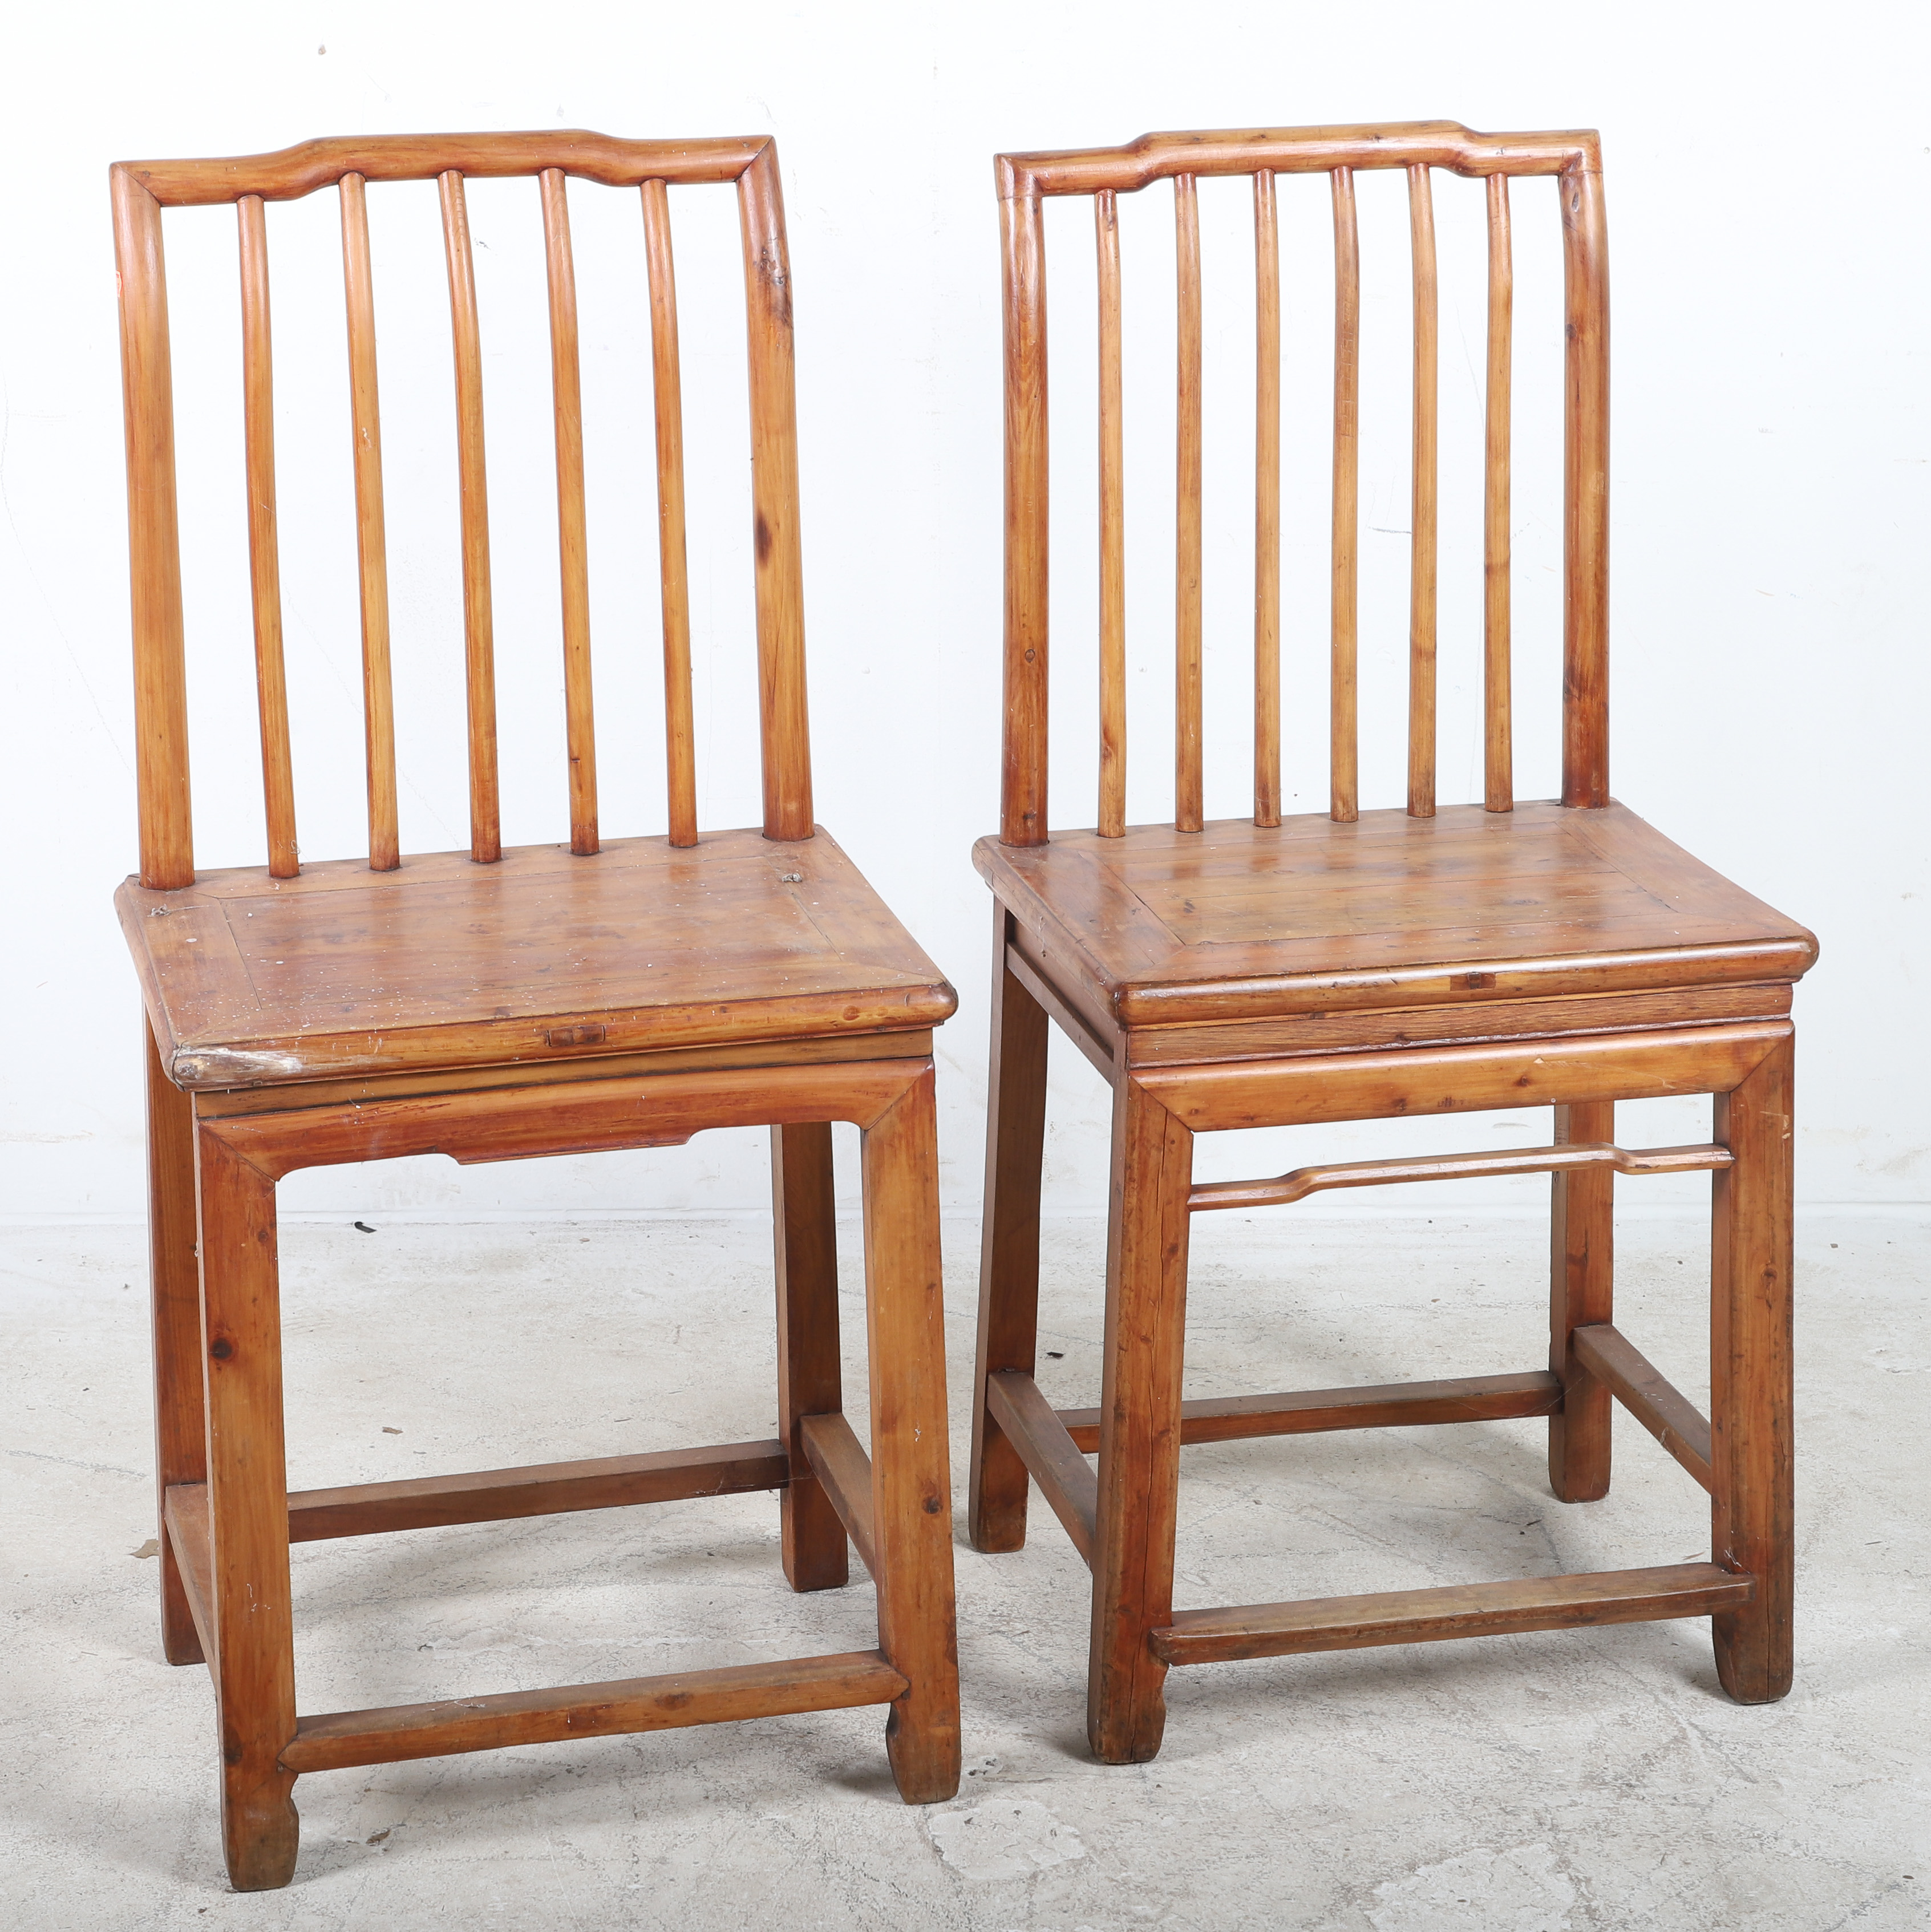  2 Chinese elmwood side chairs  3ca58e